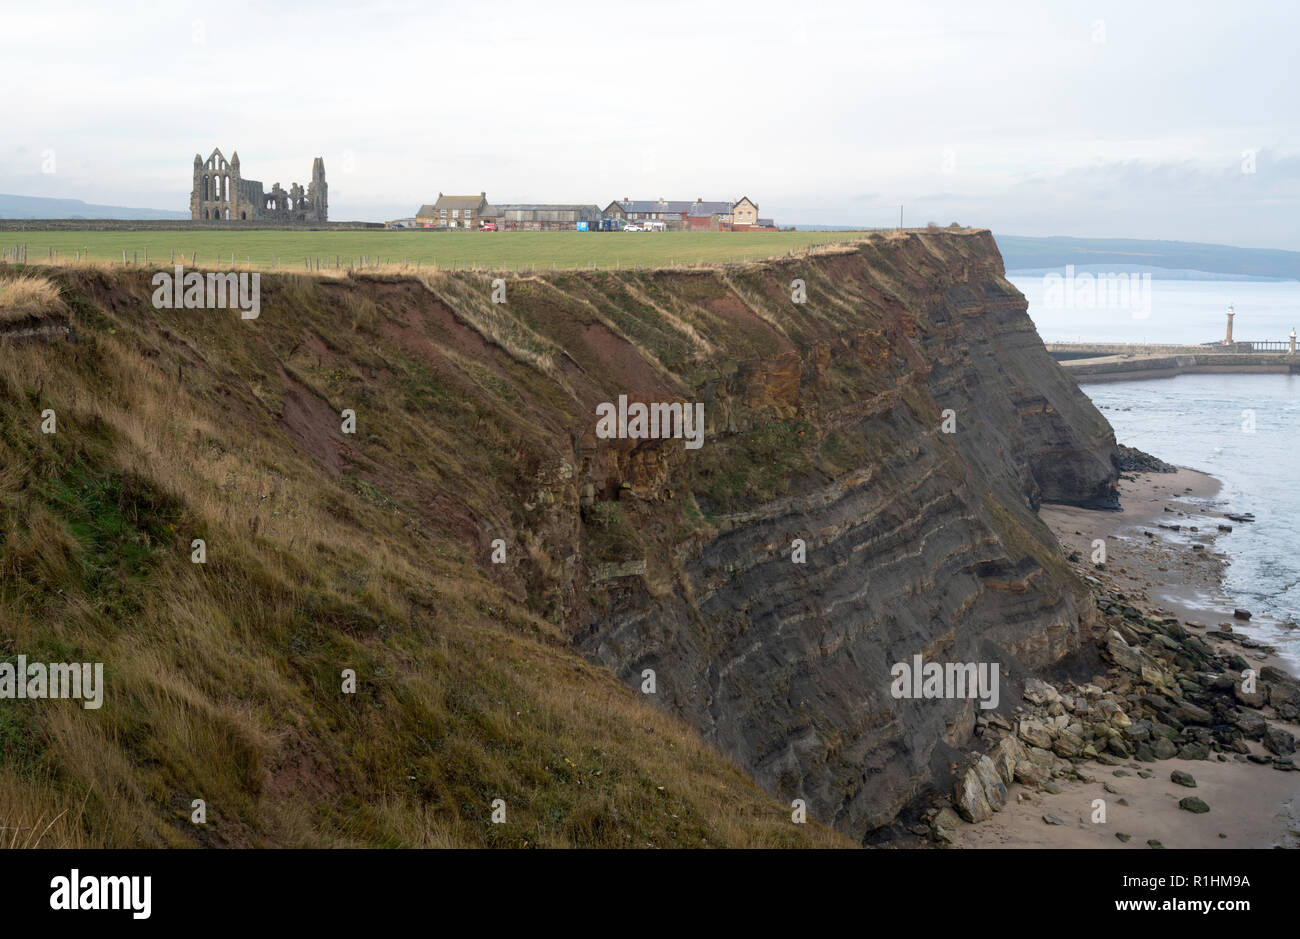 The East Cliffs south east of Whitby showing geological bedding planes, Whitby, North Yorkshire, England, UK Stock Photo